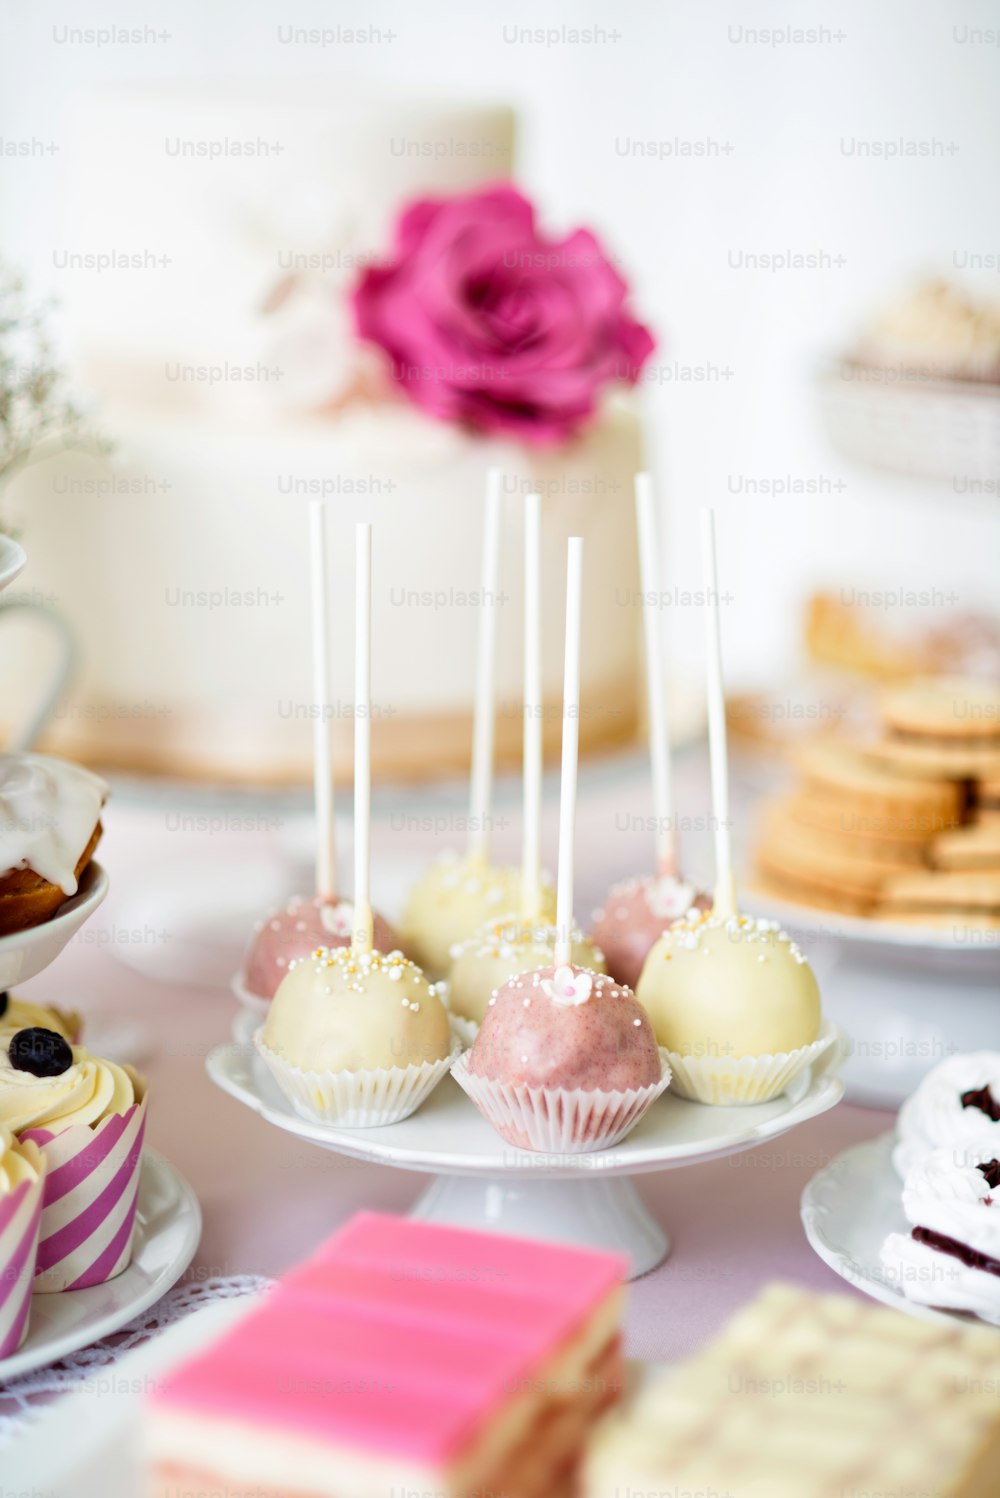 Table with white and pink cake pops on cakestand and various cakes. Candy bar.